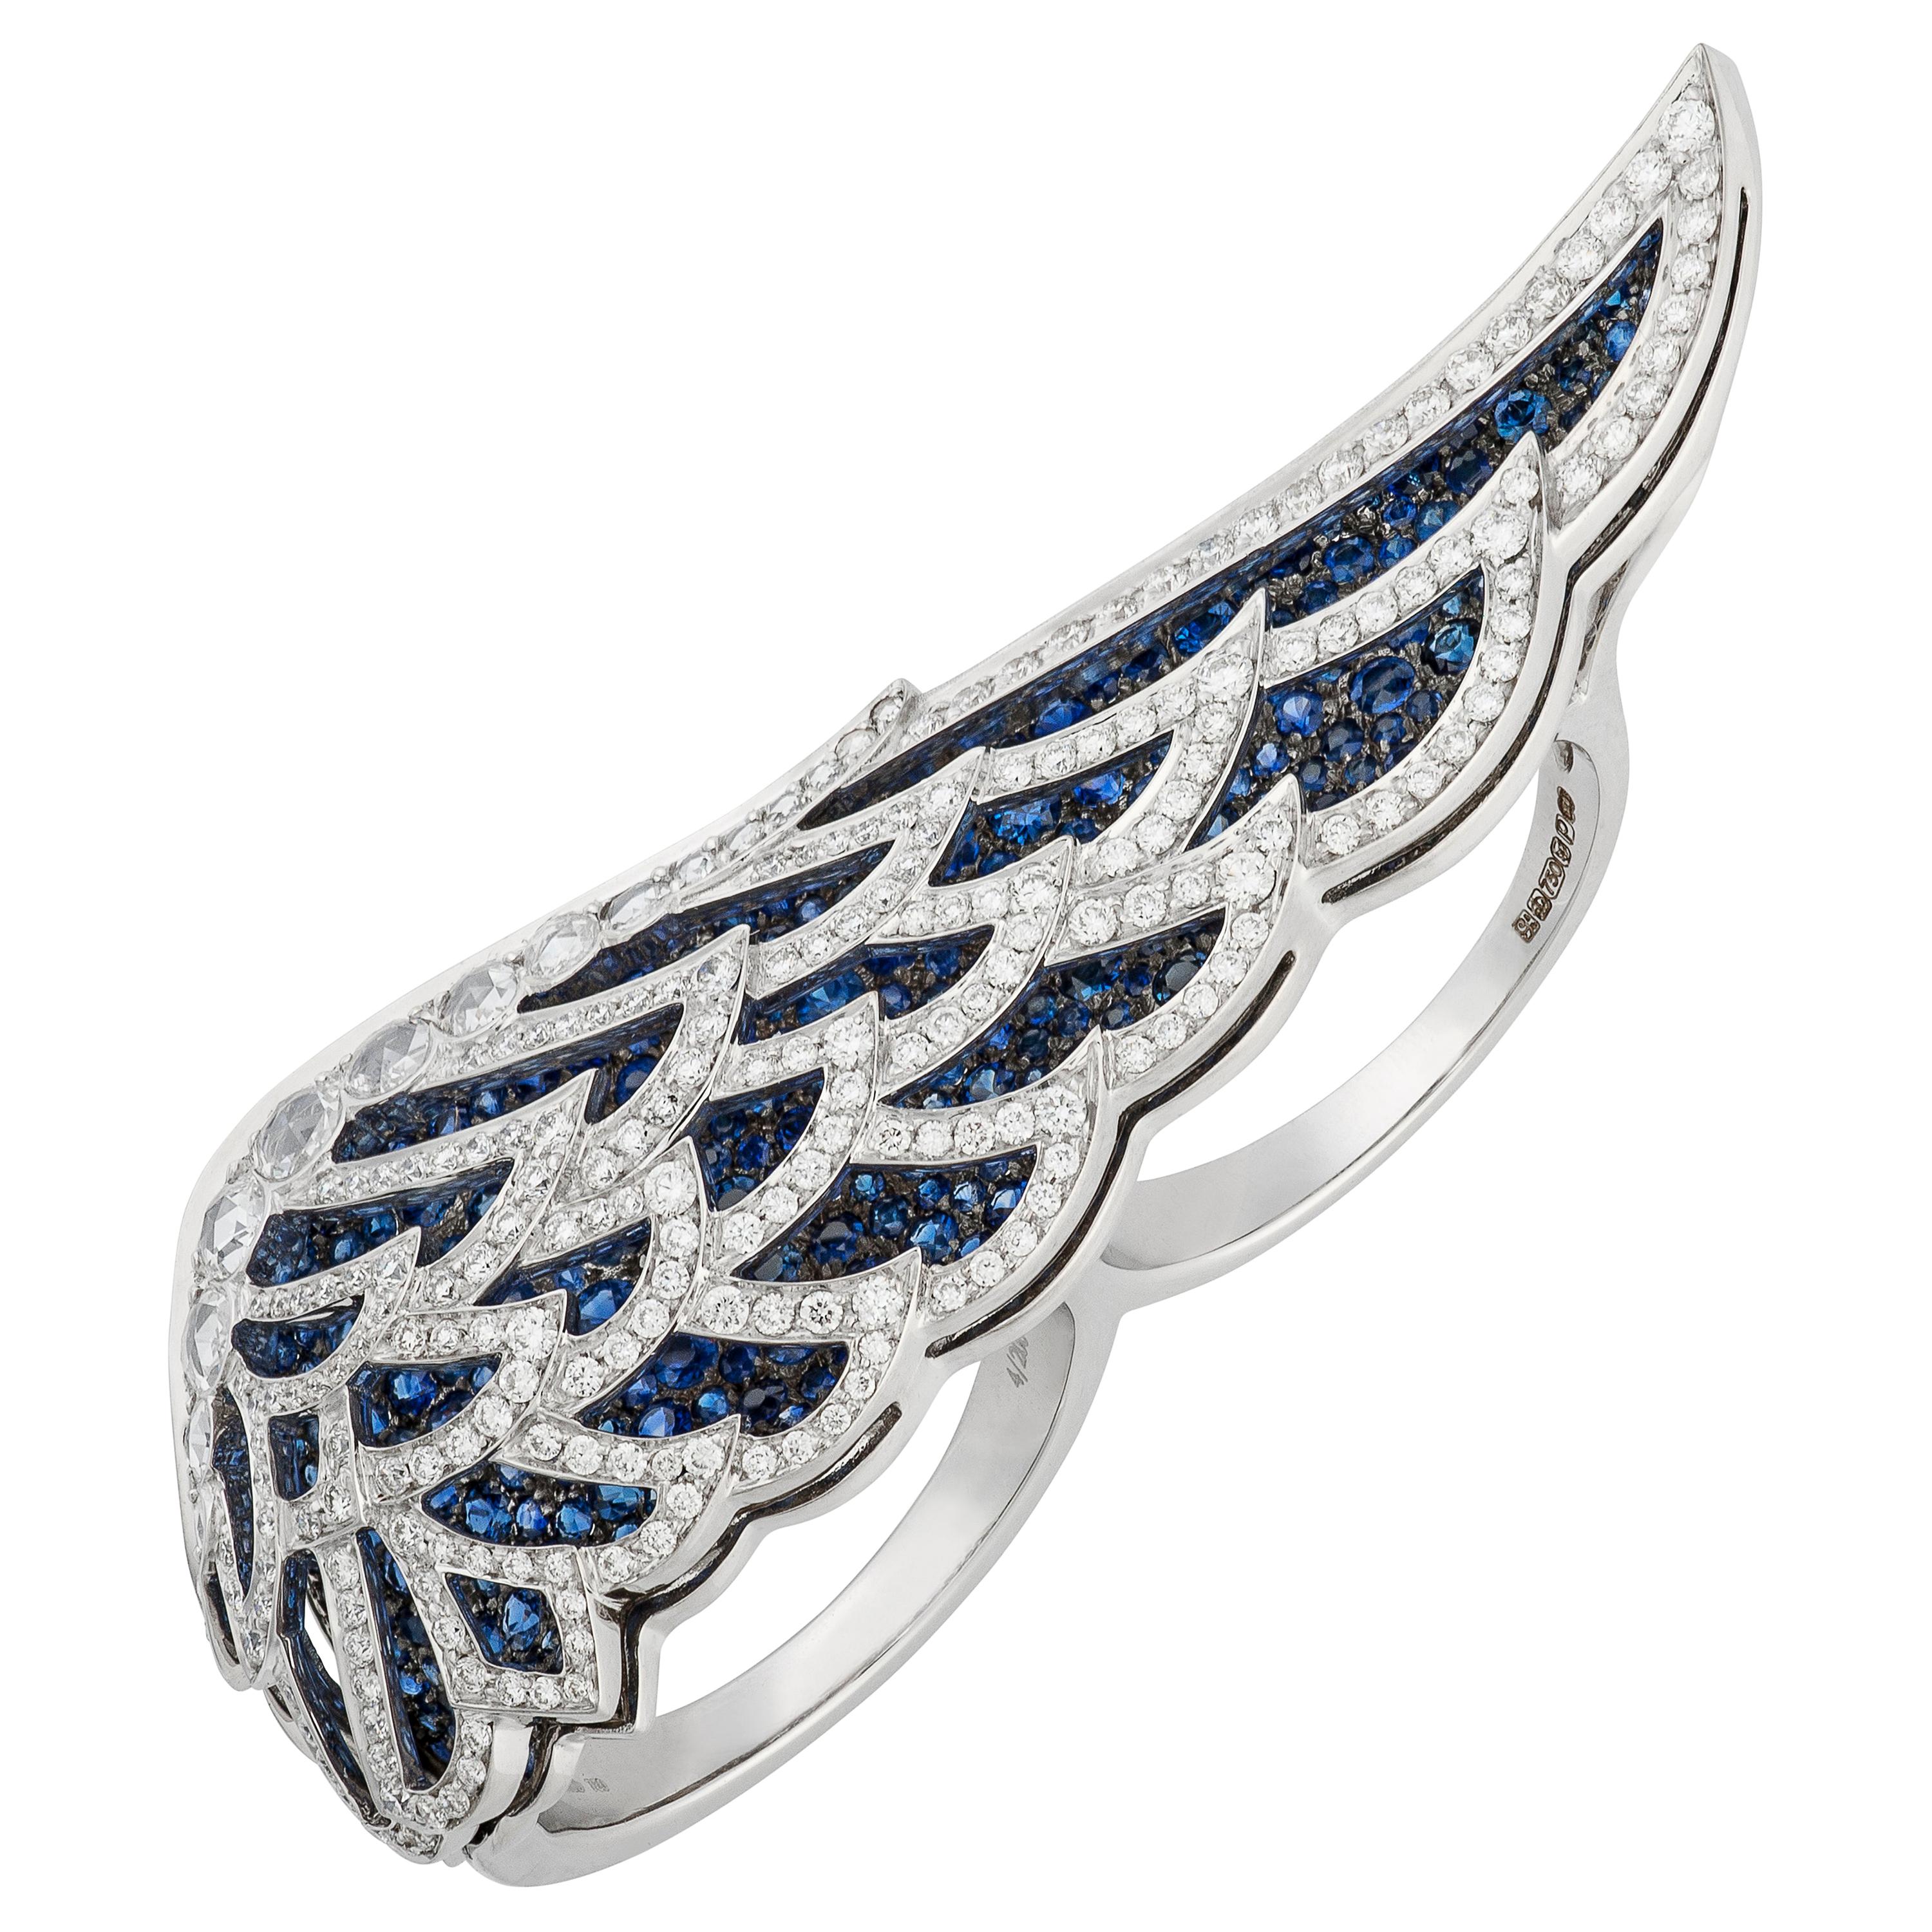 Garrard 'Wings Lace' 18 Karat White Gold White Diamond and Sapphire Double Ring For Sale